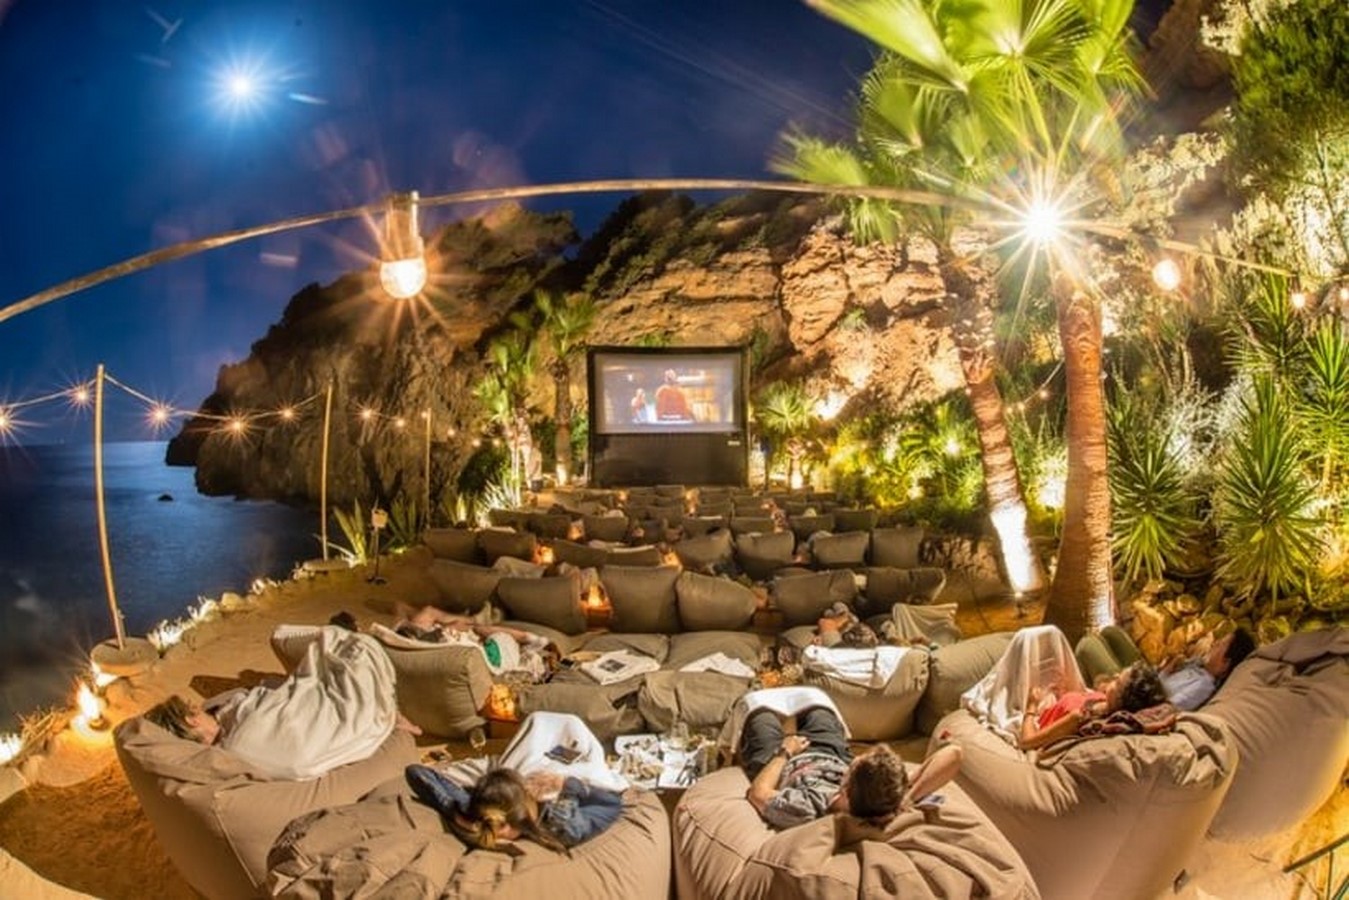 20 Luxurious theater designs for movie nights - Sheet5